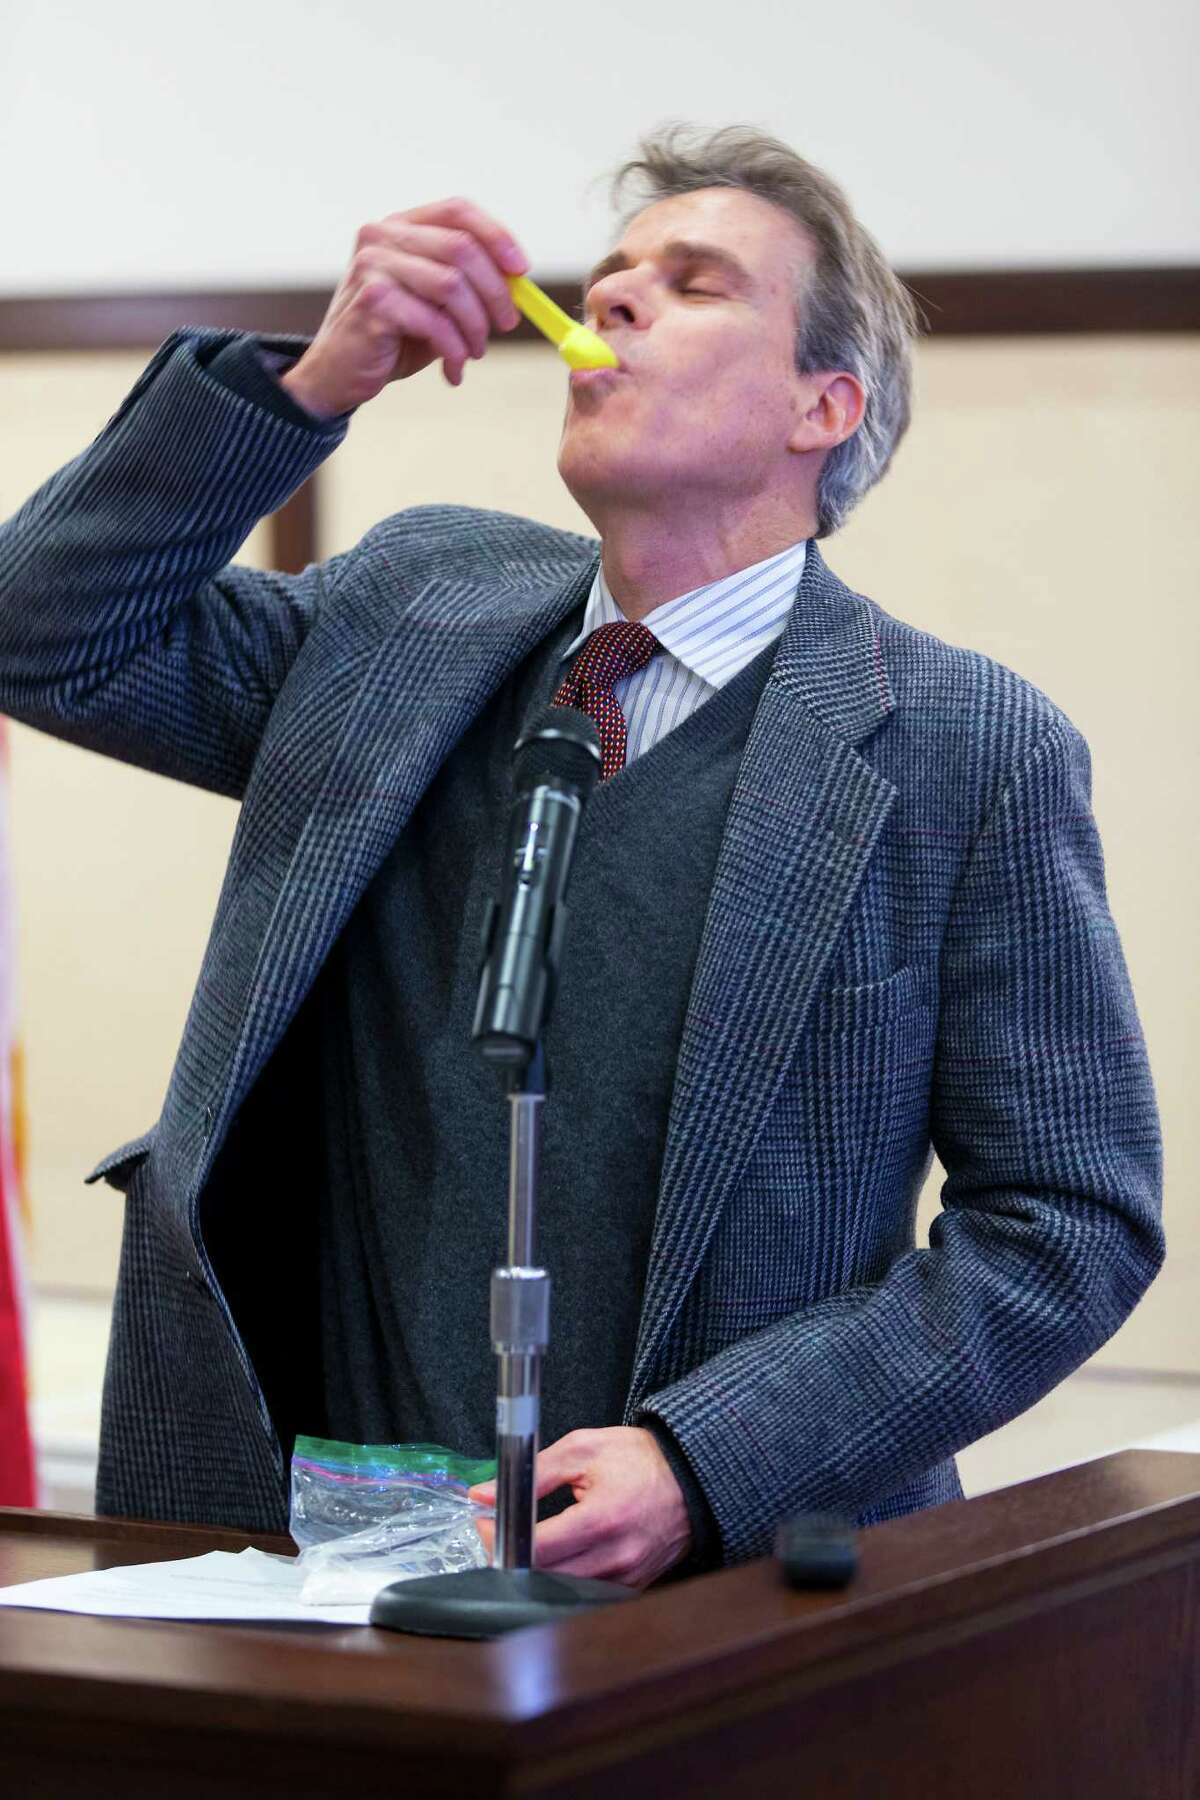 Dr. Robert Ferrer, jokingly eats a teaspoon of sugar during a press conference held Wednesday, Jan. 6. 2016 by the Bexar Healthy Beverage Coalition. The coalition was promoting alternatives to sugary drinks and Ferrer was illustrating the 16 teaspoons of sugar typically found in soft drinks.